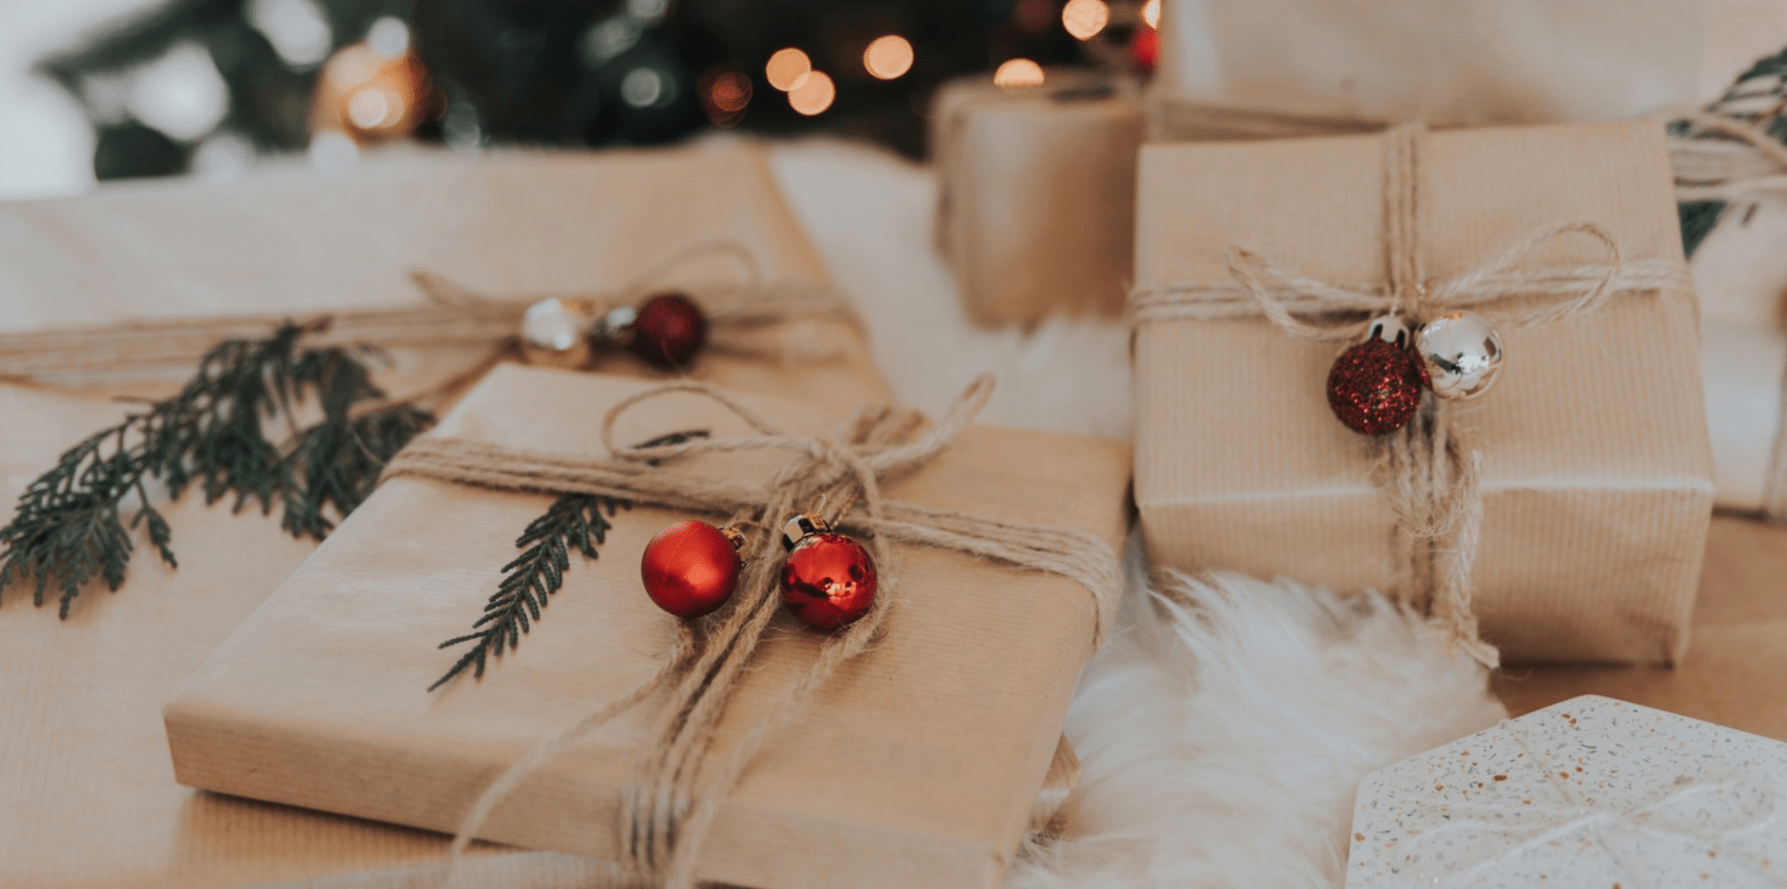 The Essential Guide to Hosting Christmas - Lumitory